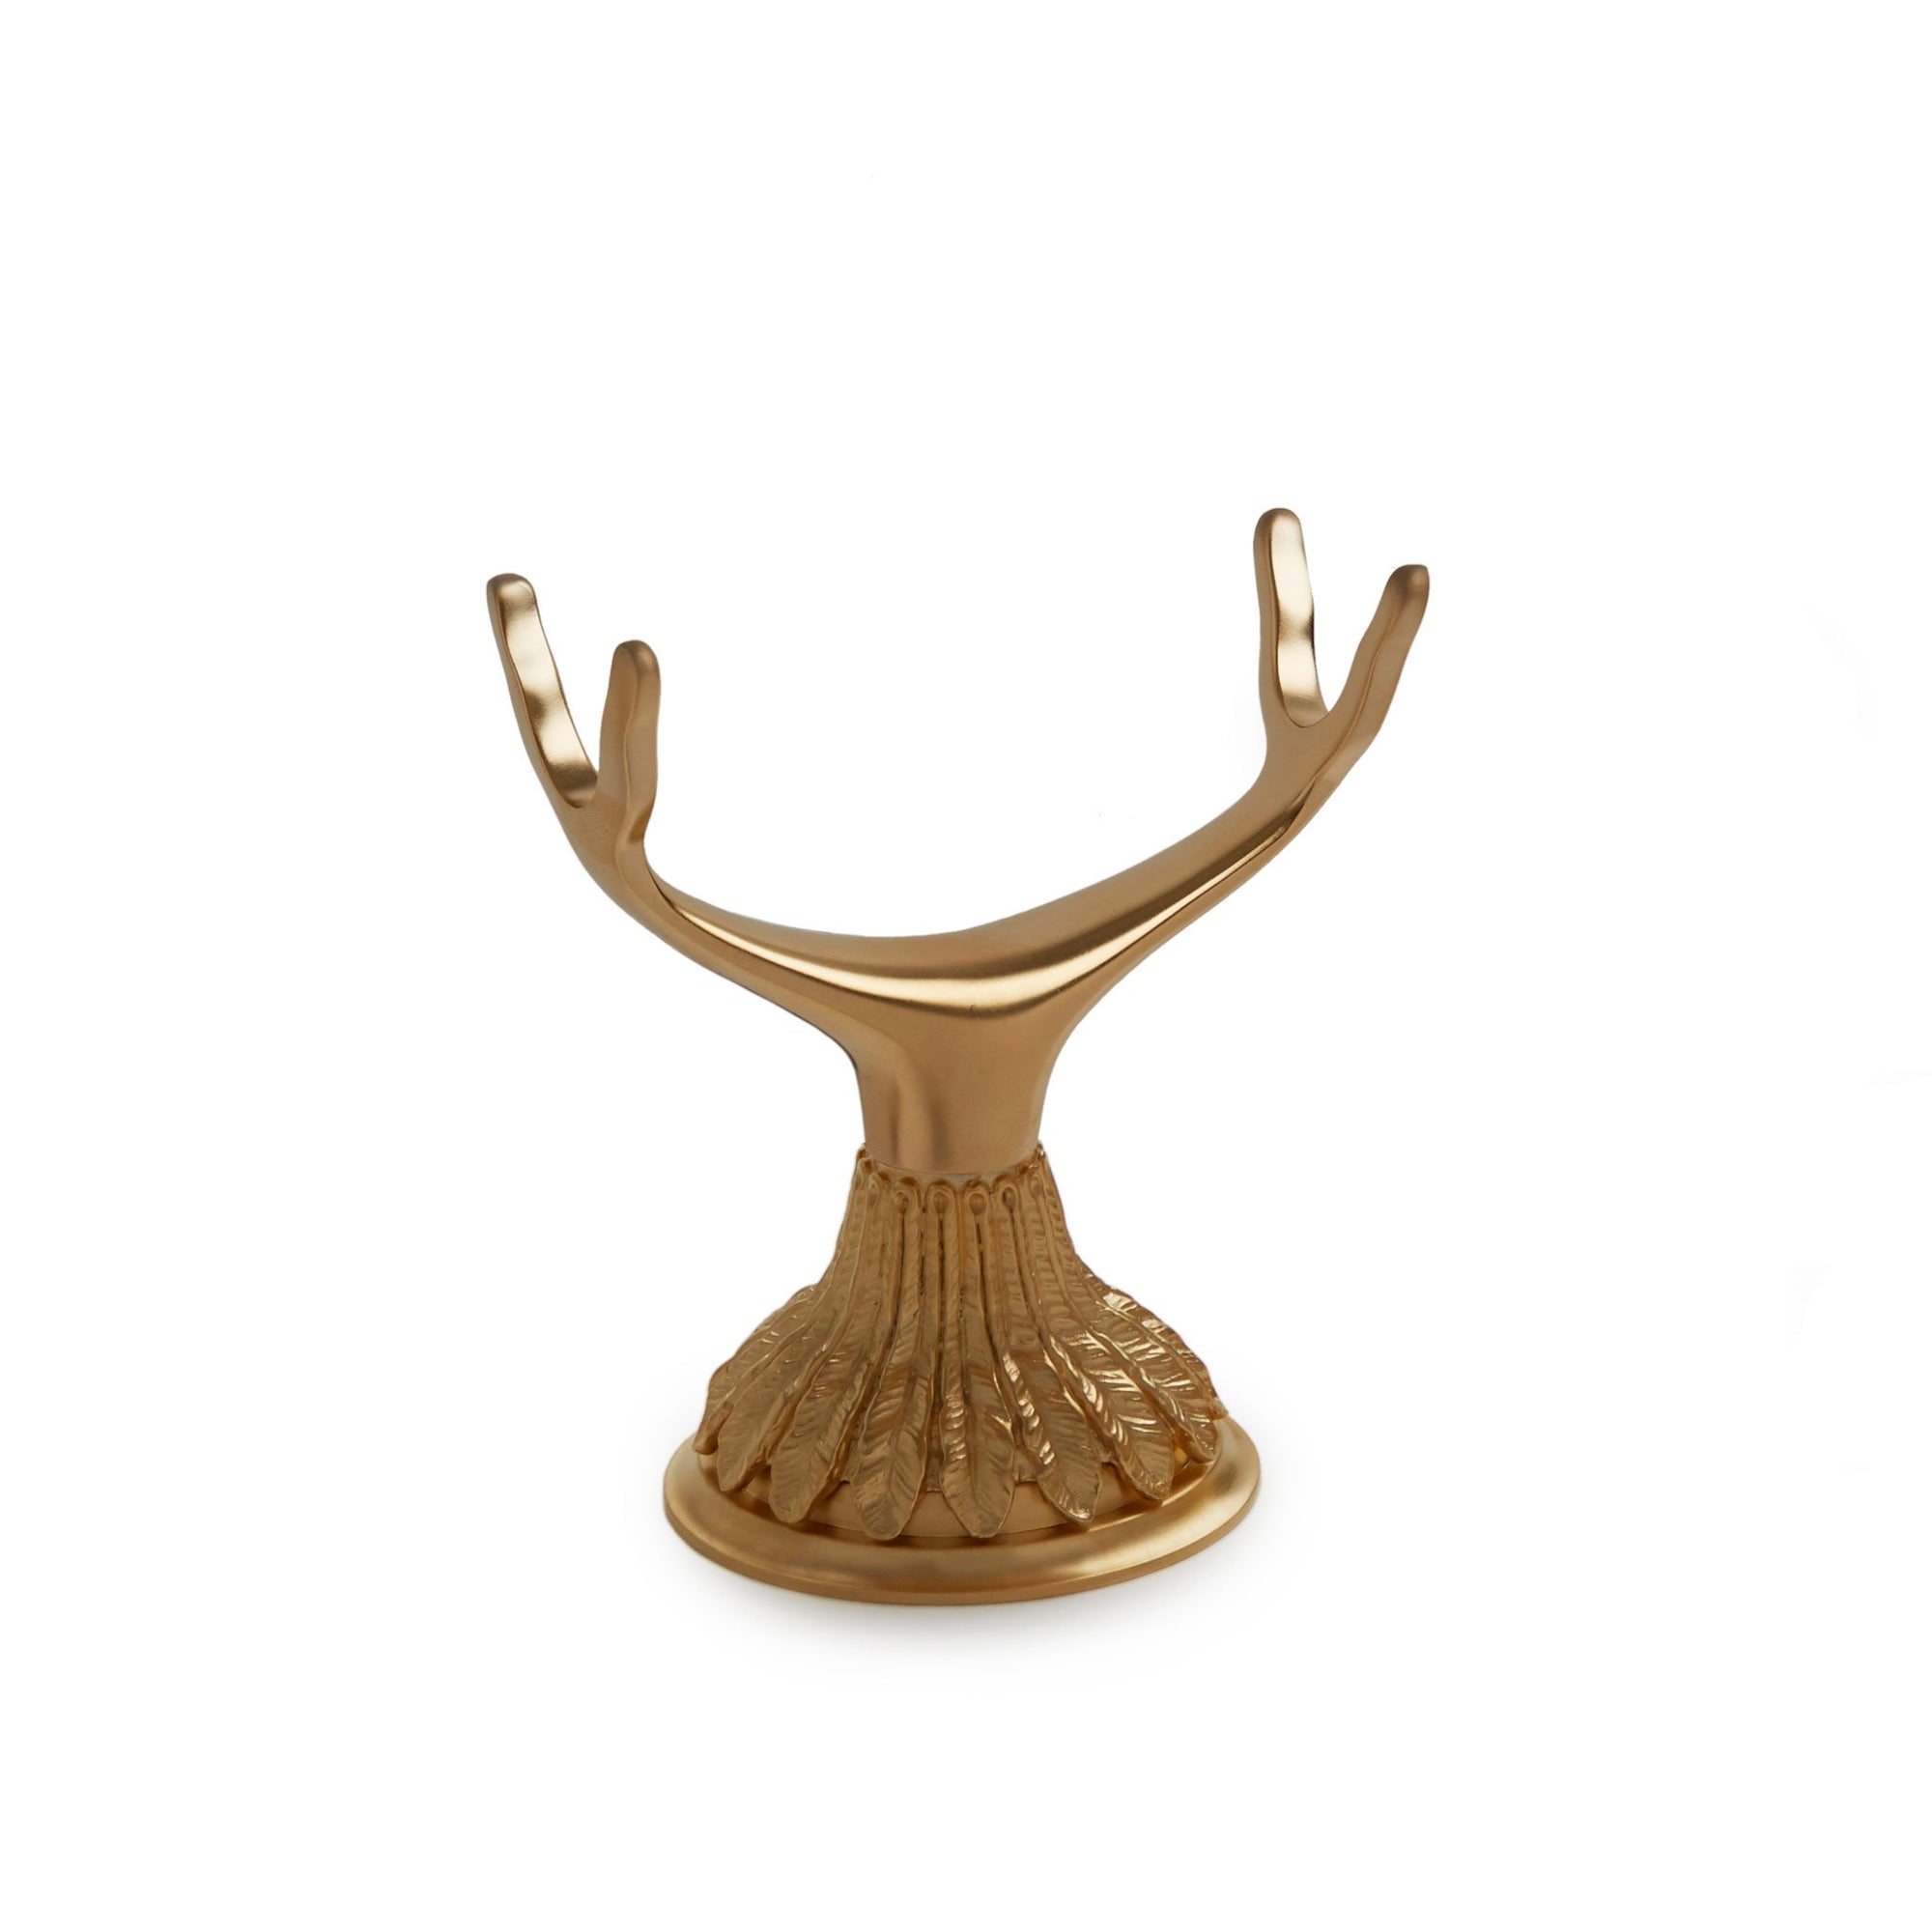 0849DKMT-AC-GP Sherle Wagner International Deck Mount Cradle with Acanthus Escutcheon in Gold Plate metal finish